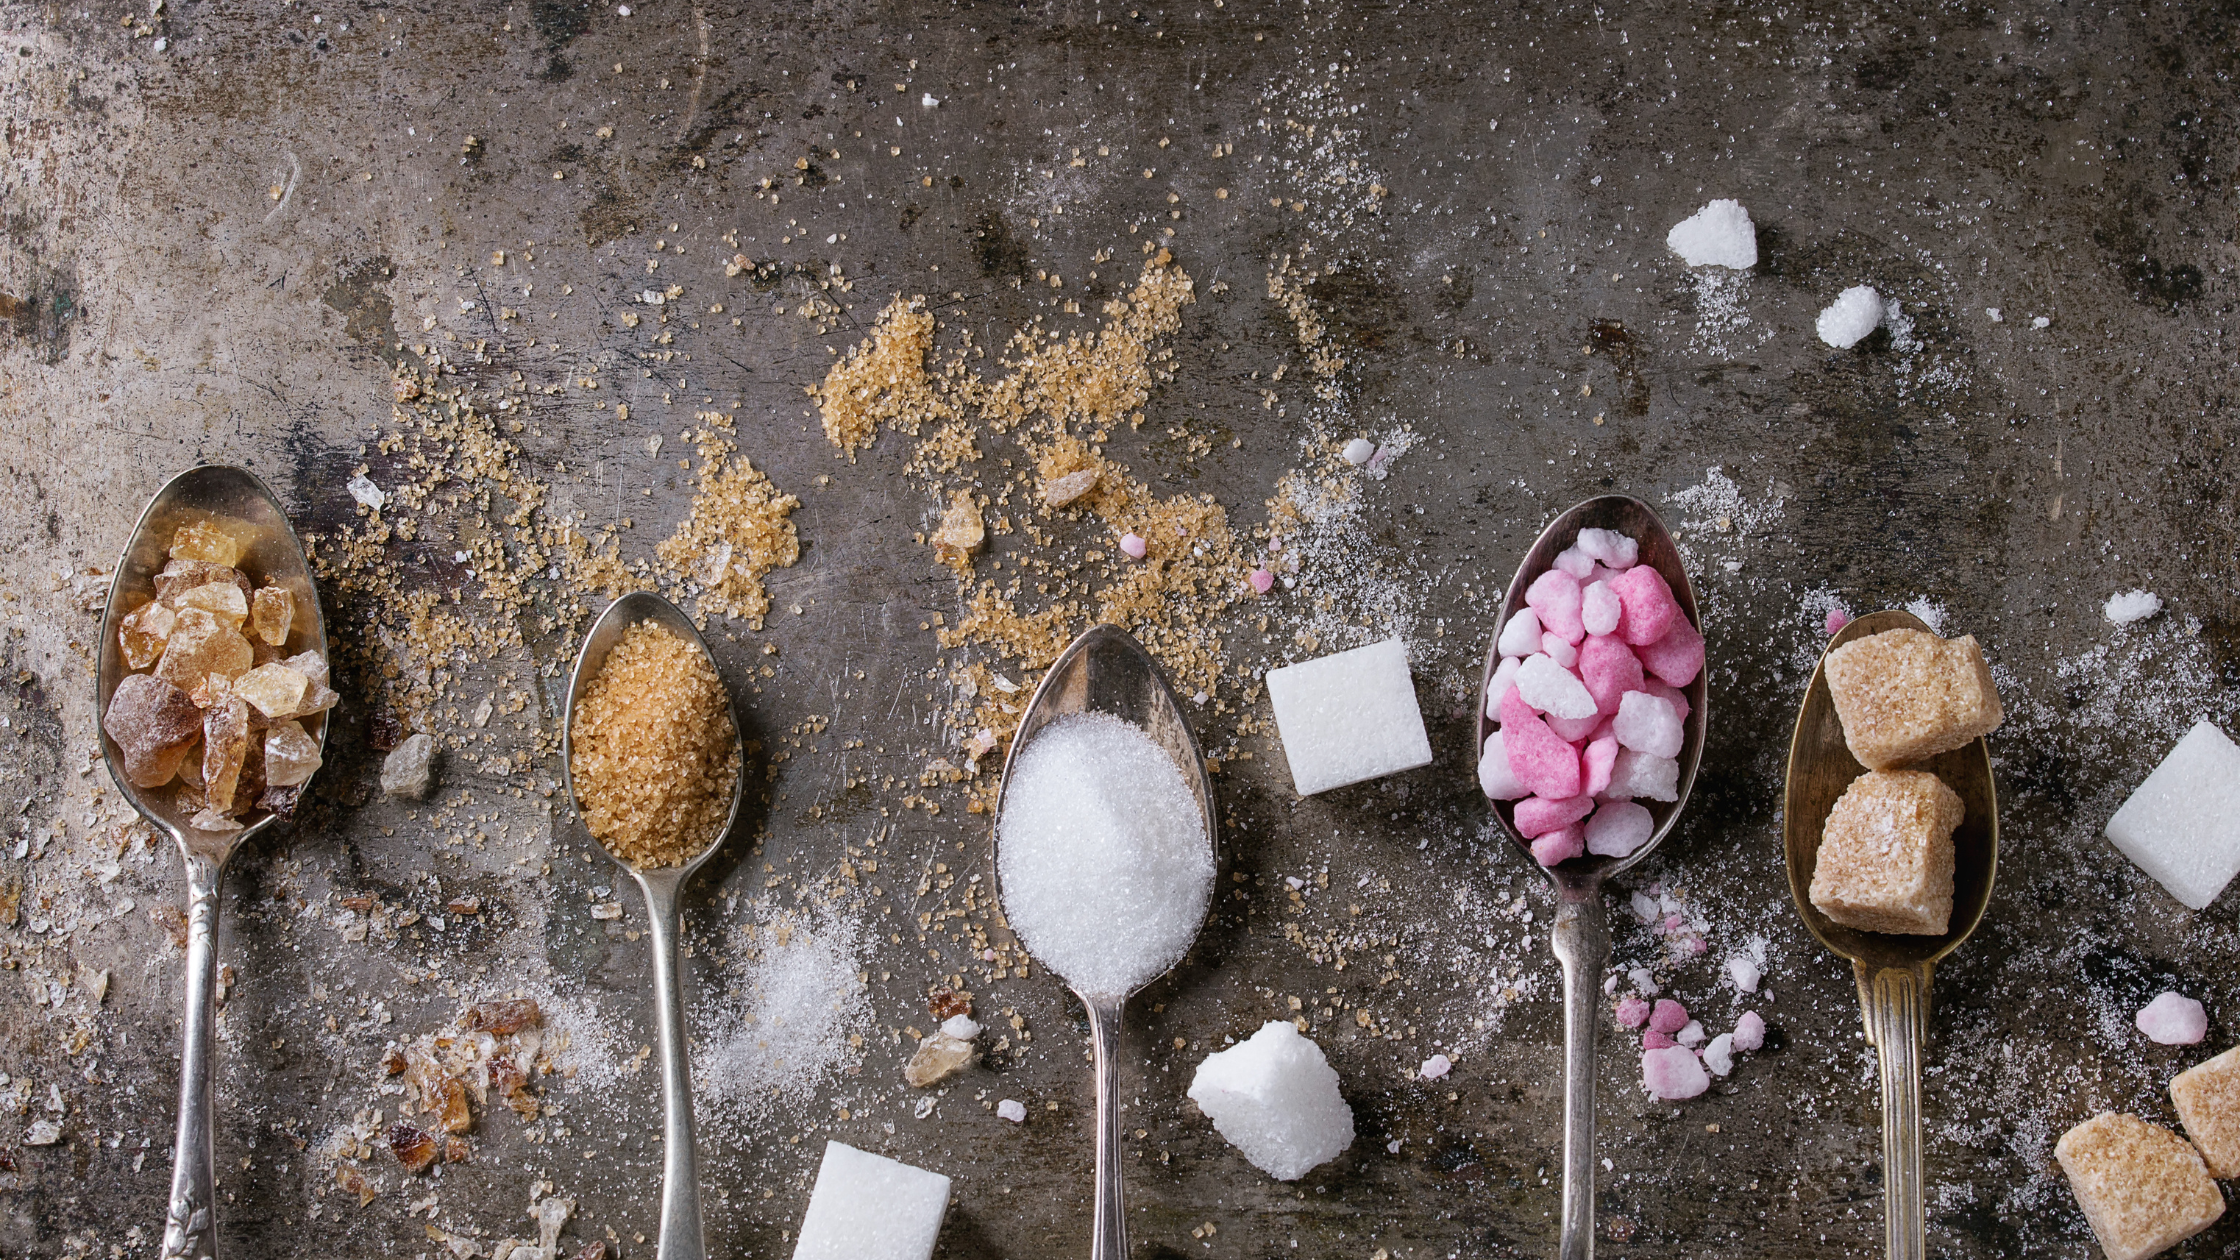 How Much Sugar Should We Limit Ourselves to Daily?